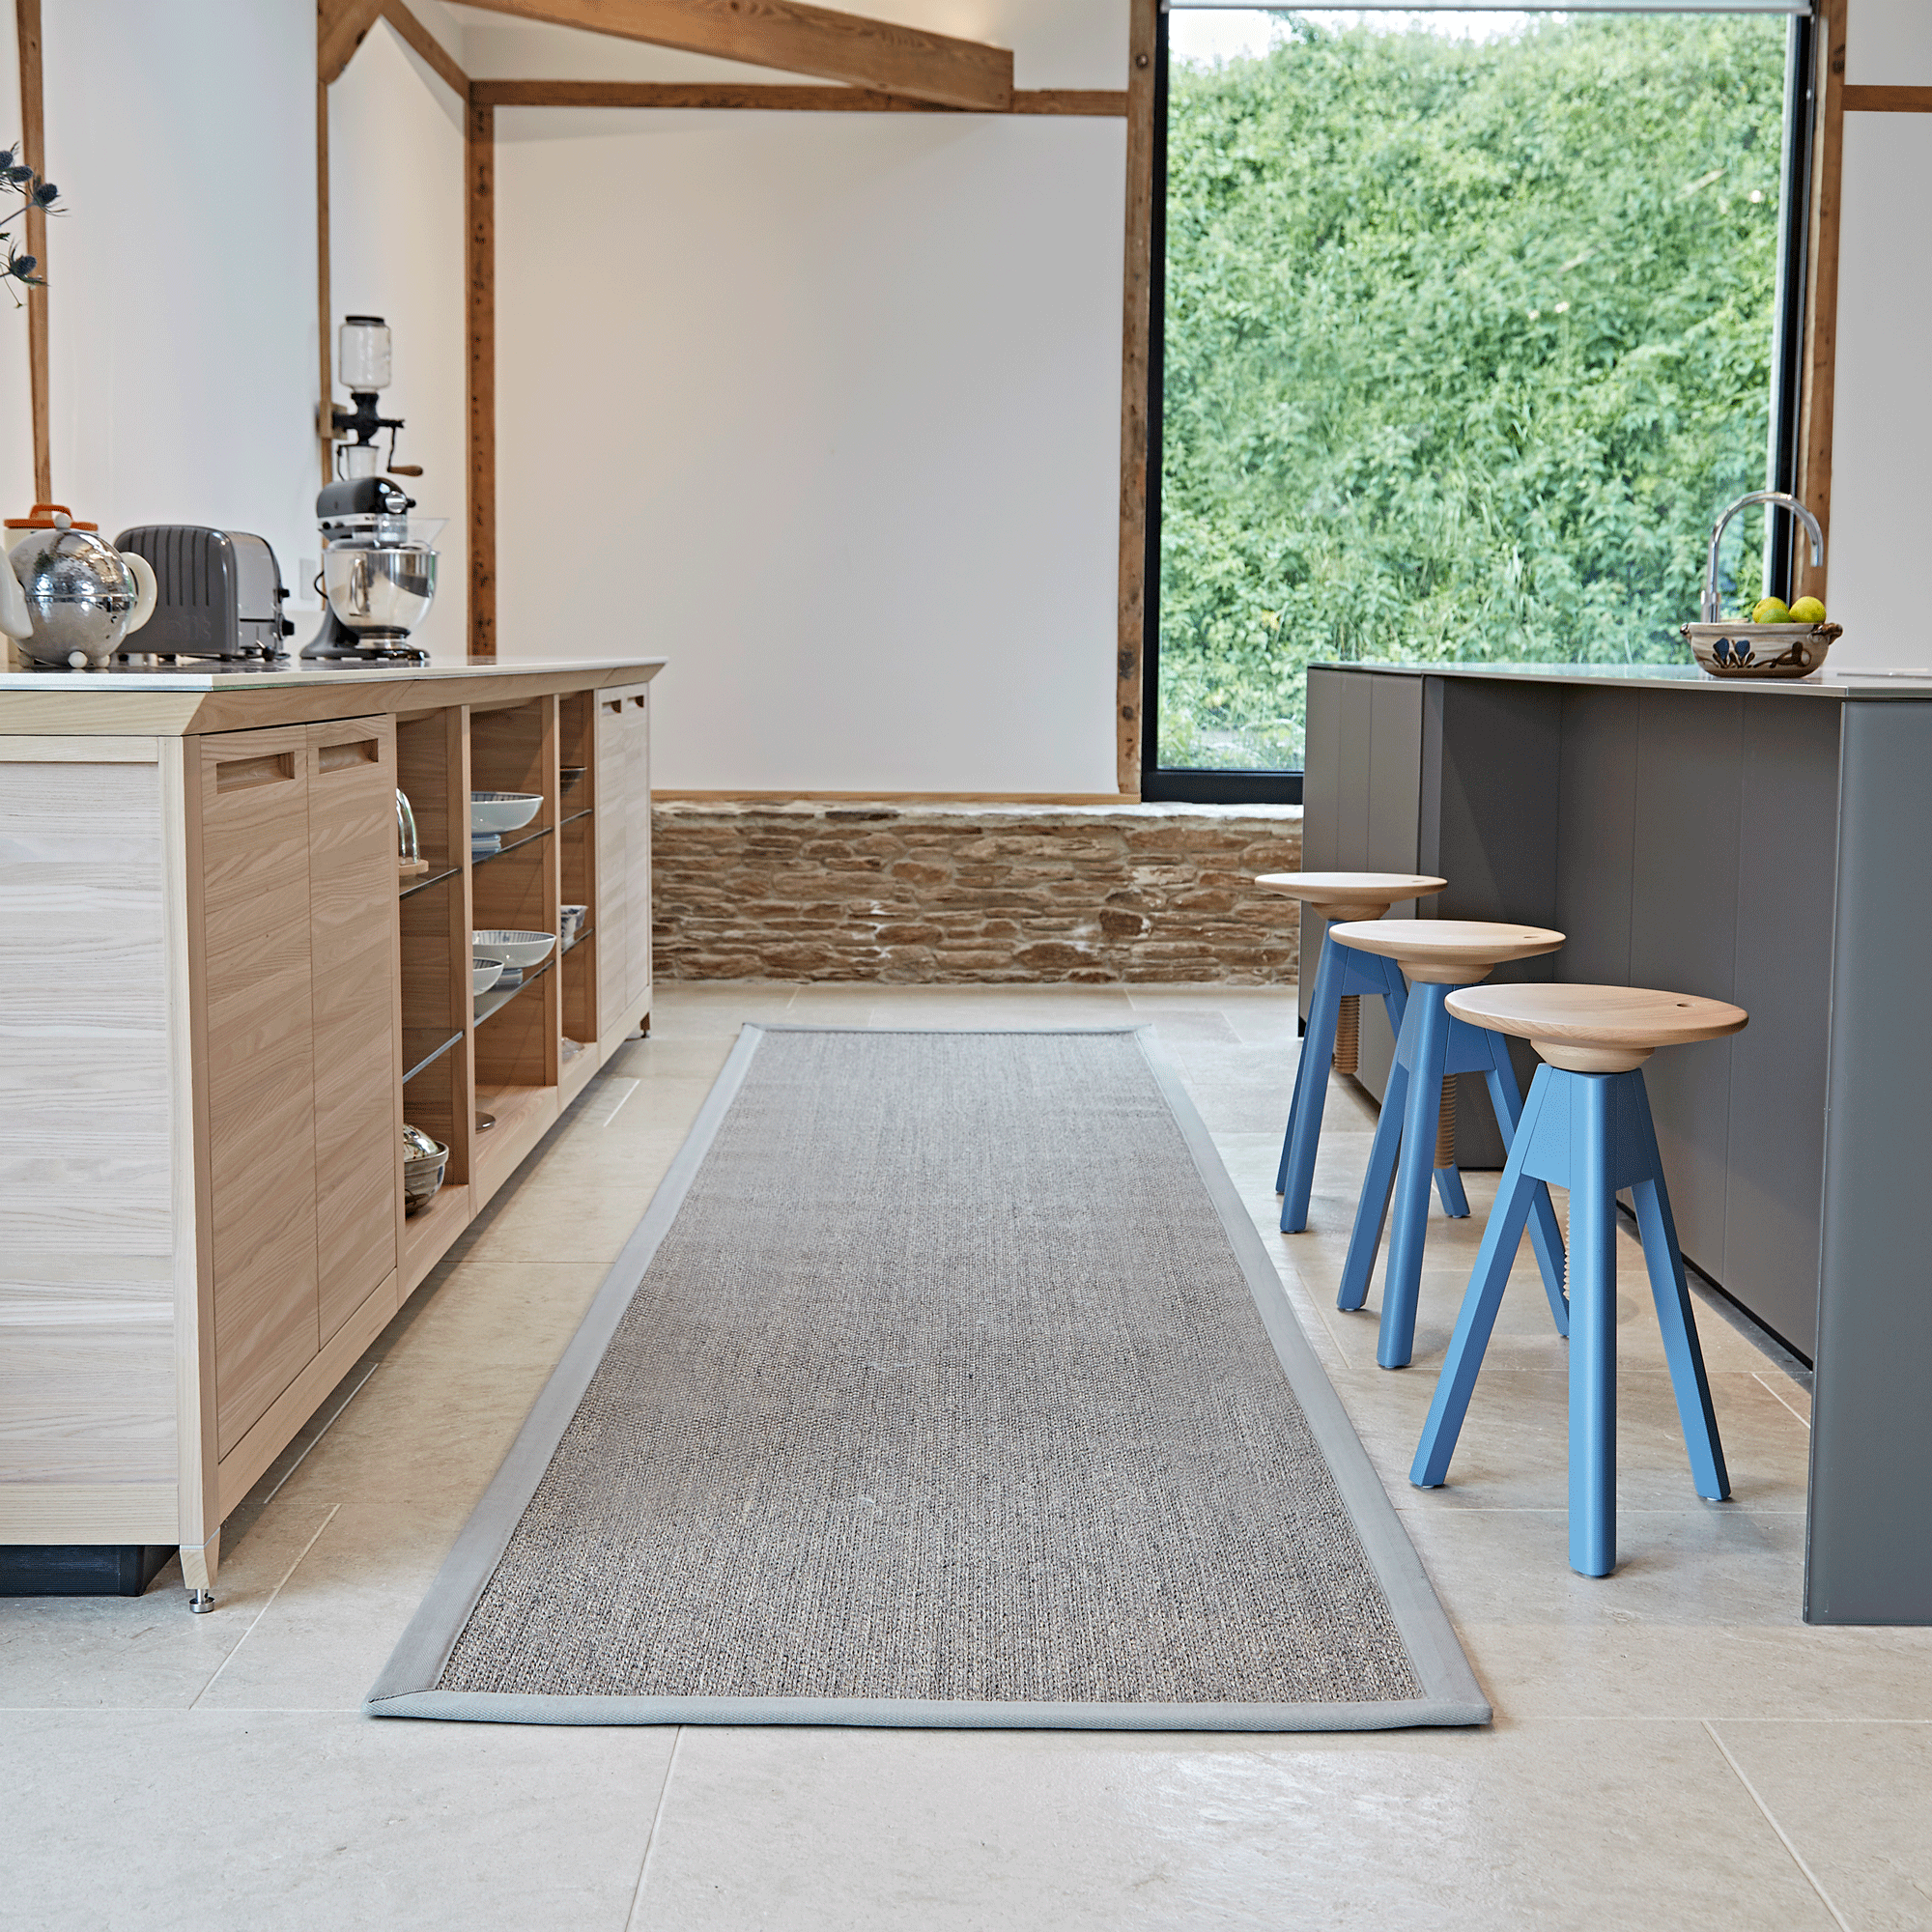 Galley kitchen with rug at the centre